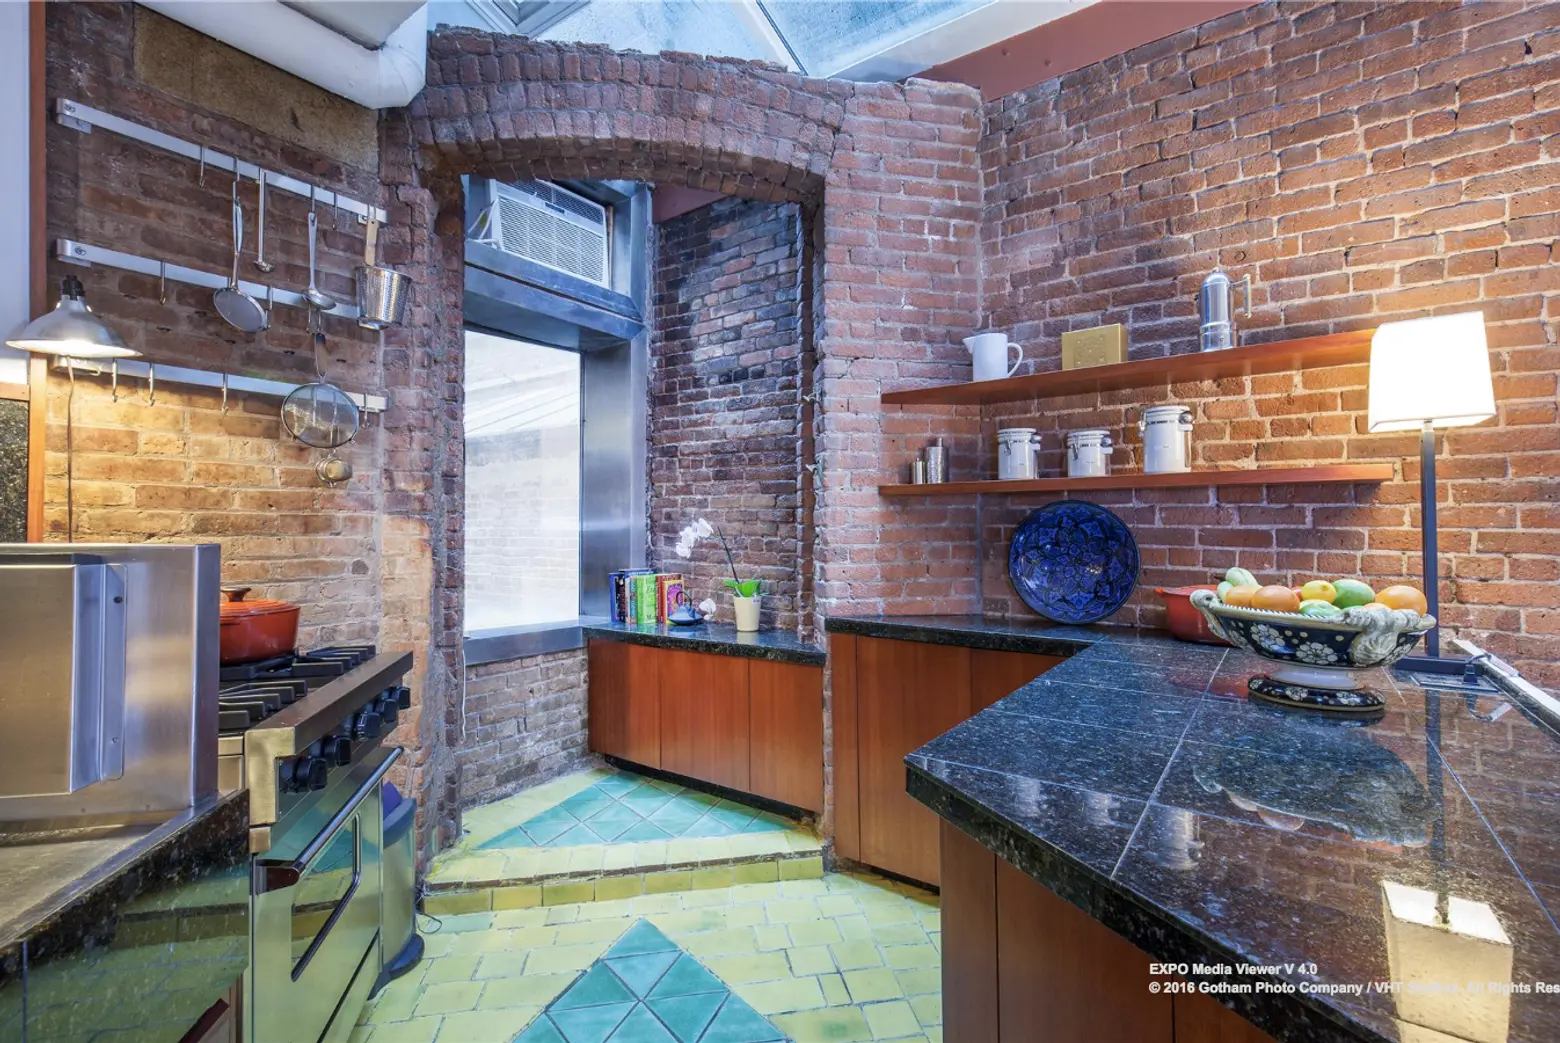 Parts of the Original Harlem Hospital Live On in this Funky Tribeca Duplex Loft